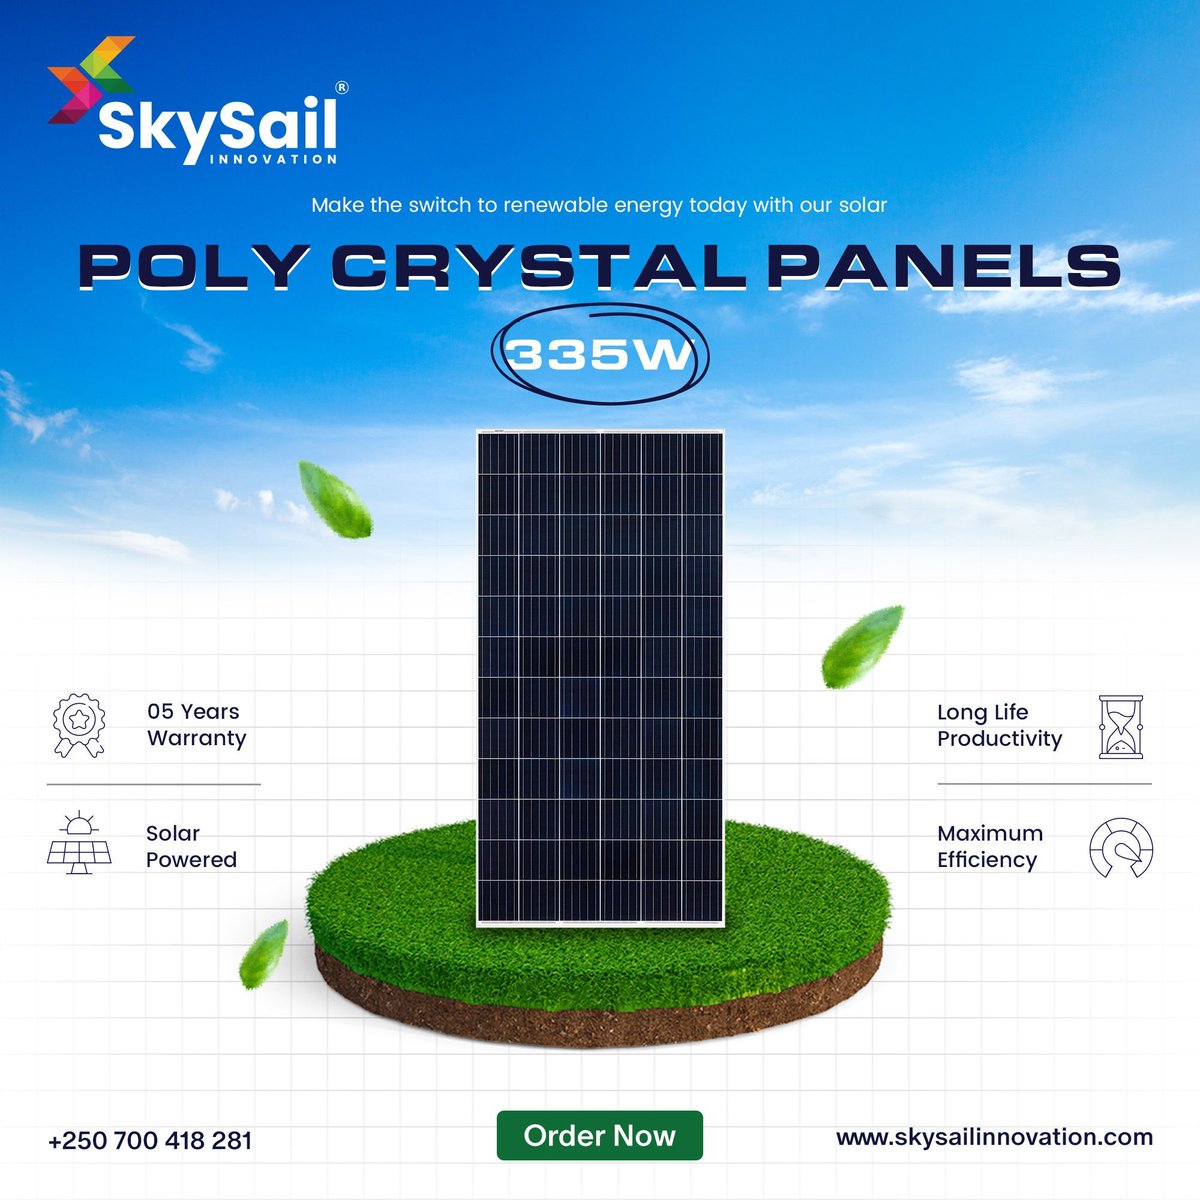 Ready to make the switch to renewable energy? ⚡️ Our solar Poly Crystal Panels, offering 335W, are the perfect choice for powering your sustainable lifestyle. Start reducing your carbon footprint today! #SkySailInnovation #RenewableEnergy #SolarPower #SustainableLiving